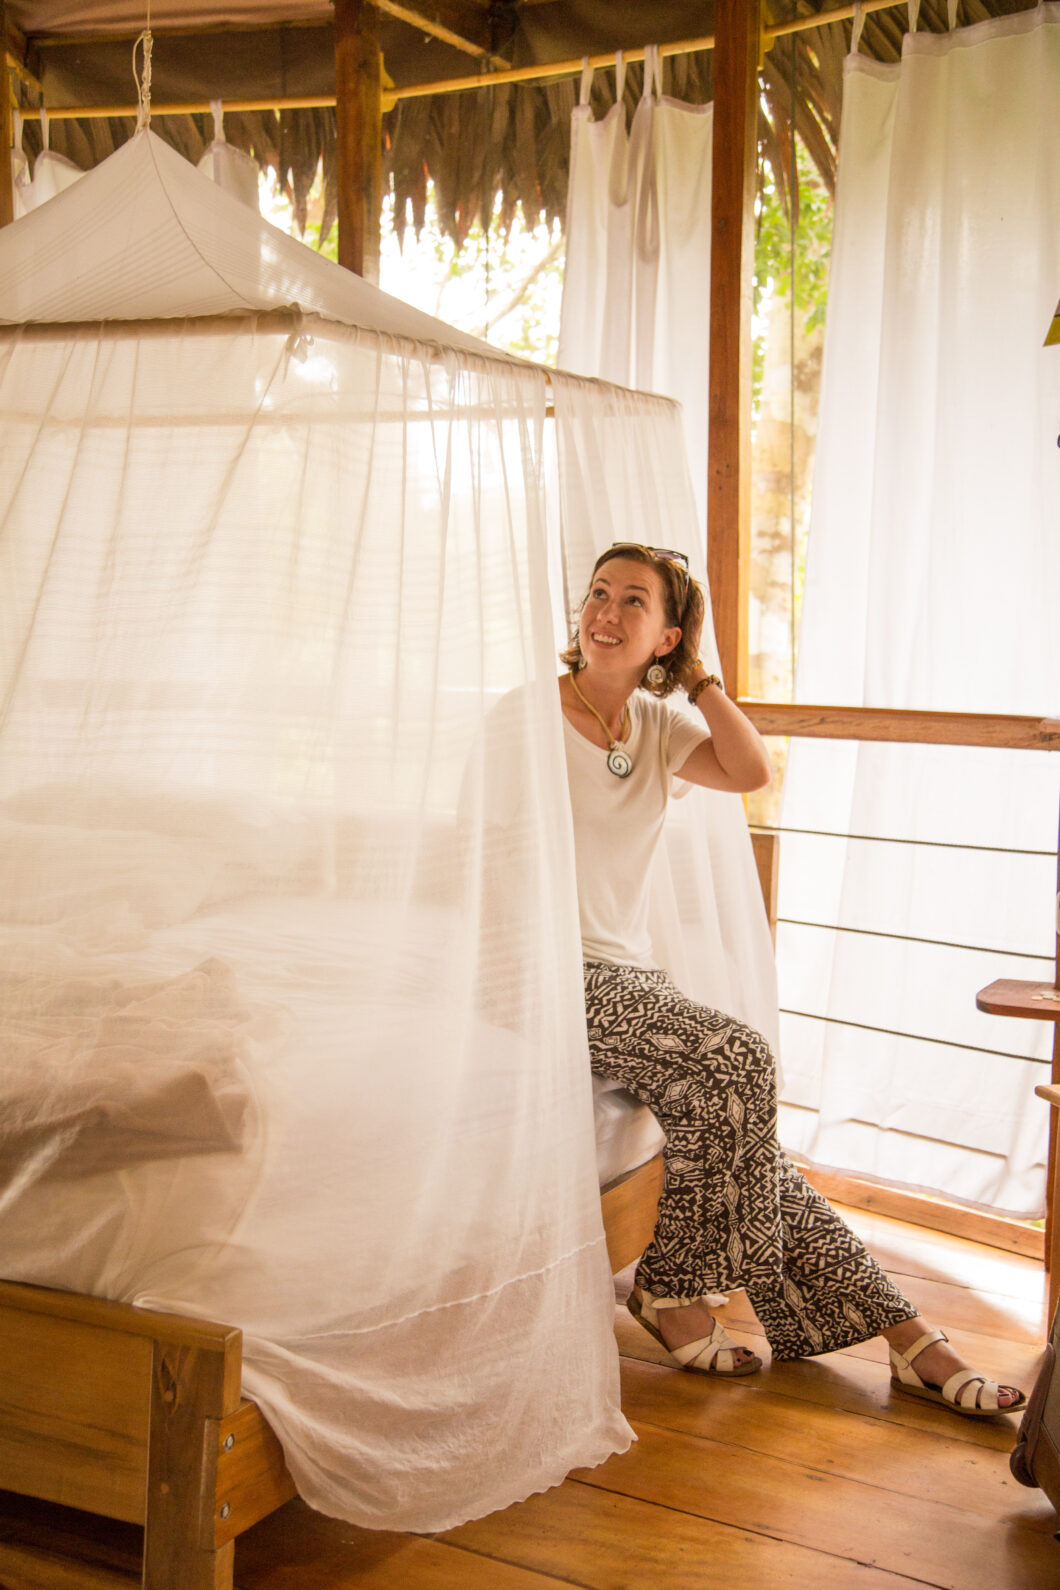 A woman sits on a bed inside a luxurious tropical hut. The bed is canopied in white mosquito netting.